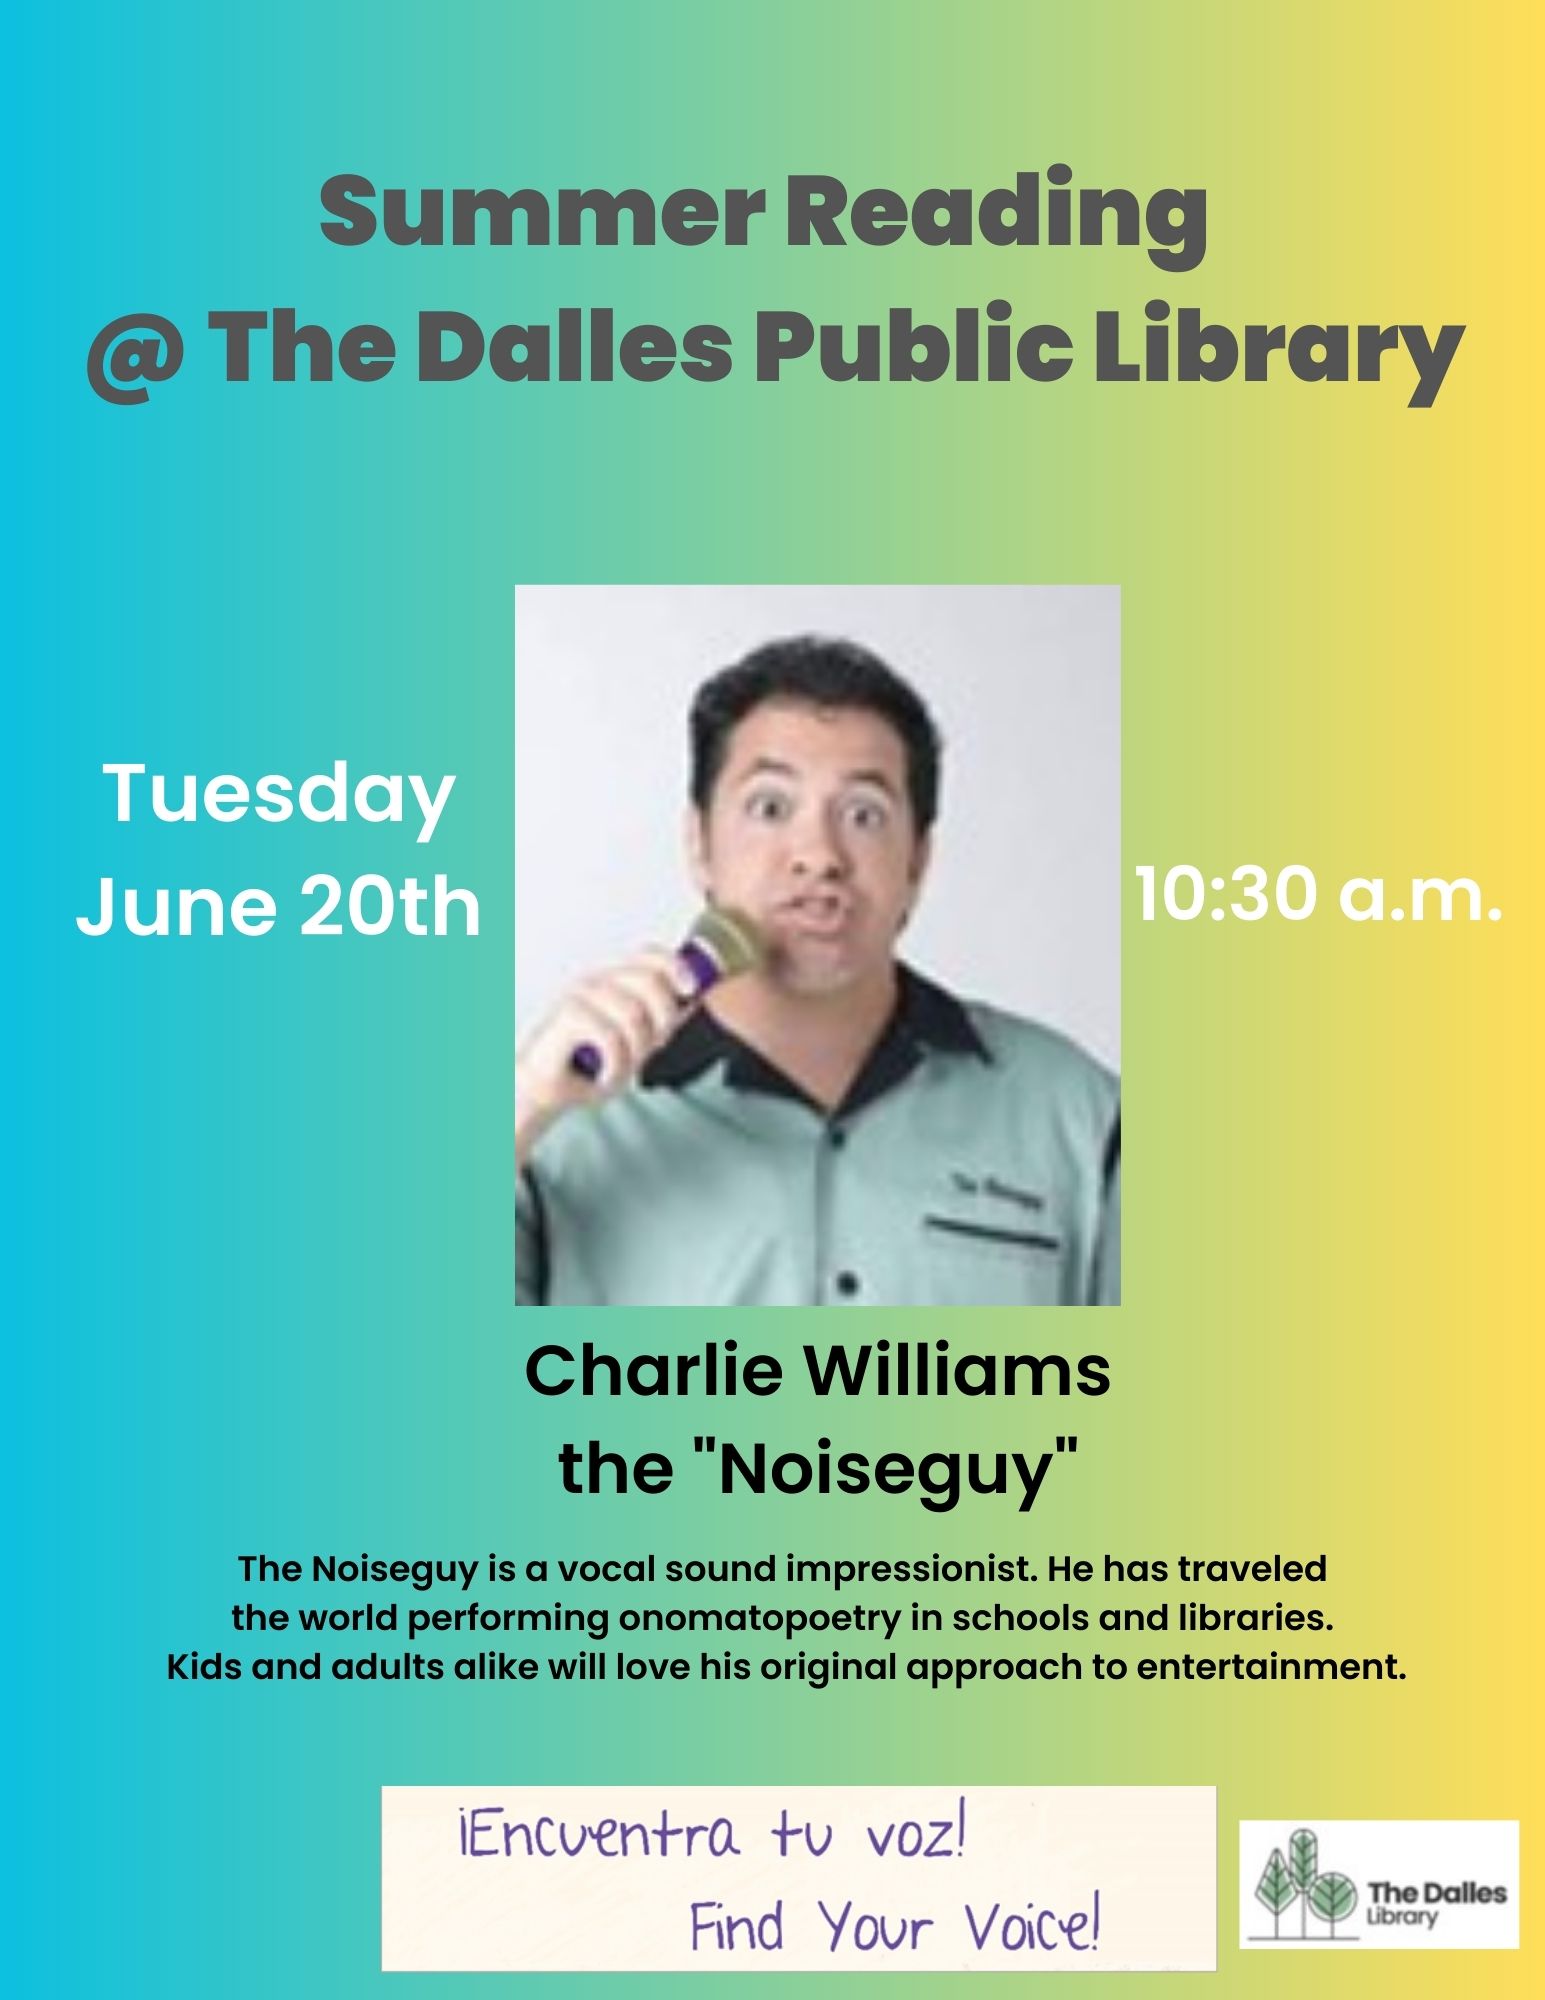 Summer Reading event with Charlie Williams